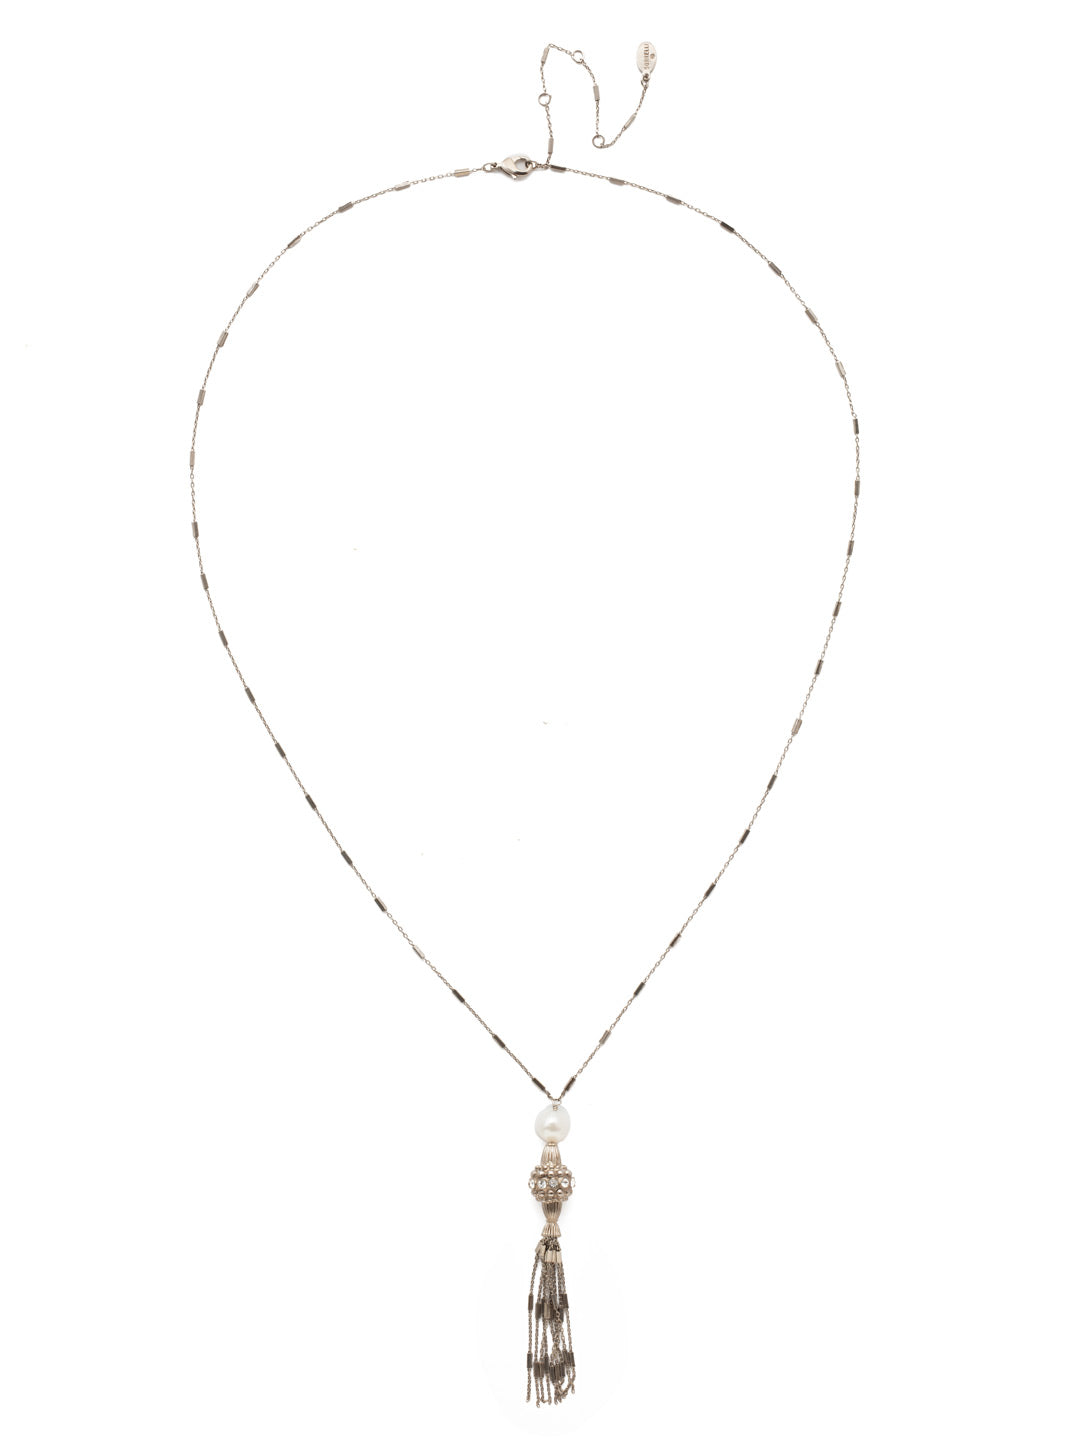 Joyelle Pendant Necklace - NEA42ASSTC - <p>This long strand necklace features a purposefully placed pearl atop an intricate metal element. This design is further enhanced by a delicate, free flowing multi-strand tassel. From Sorrelli's Storm Clouds collection in our Antique Silver-tone finish.</p>